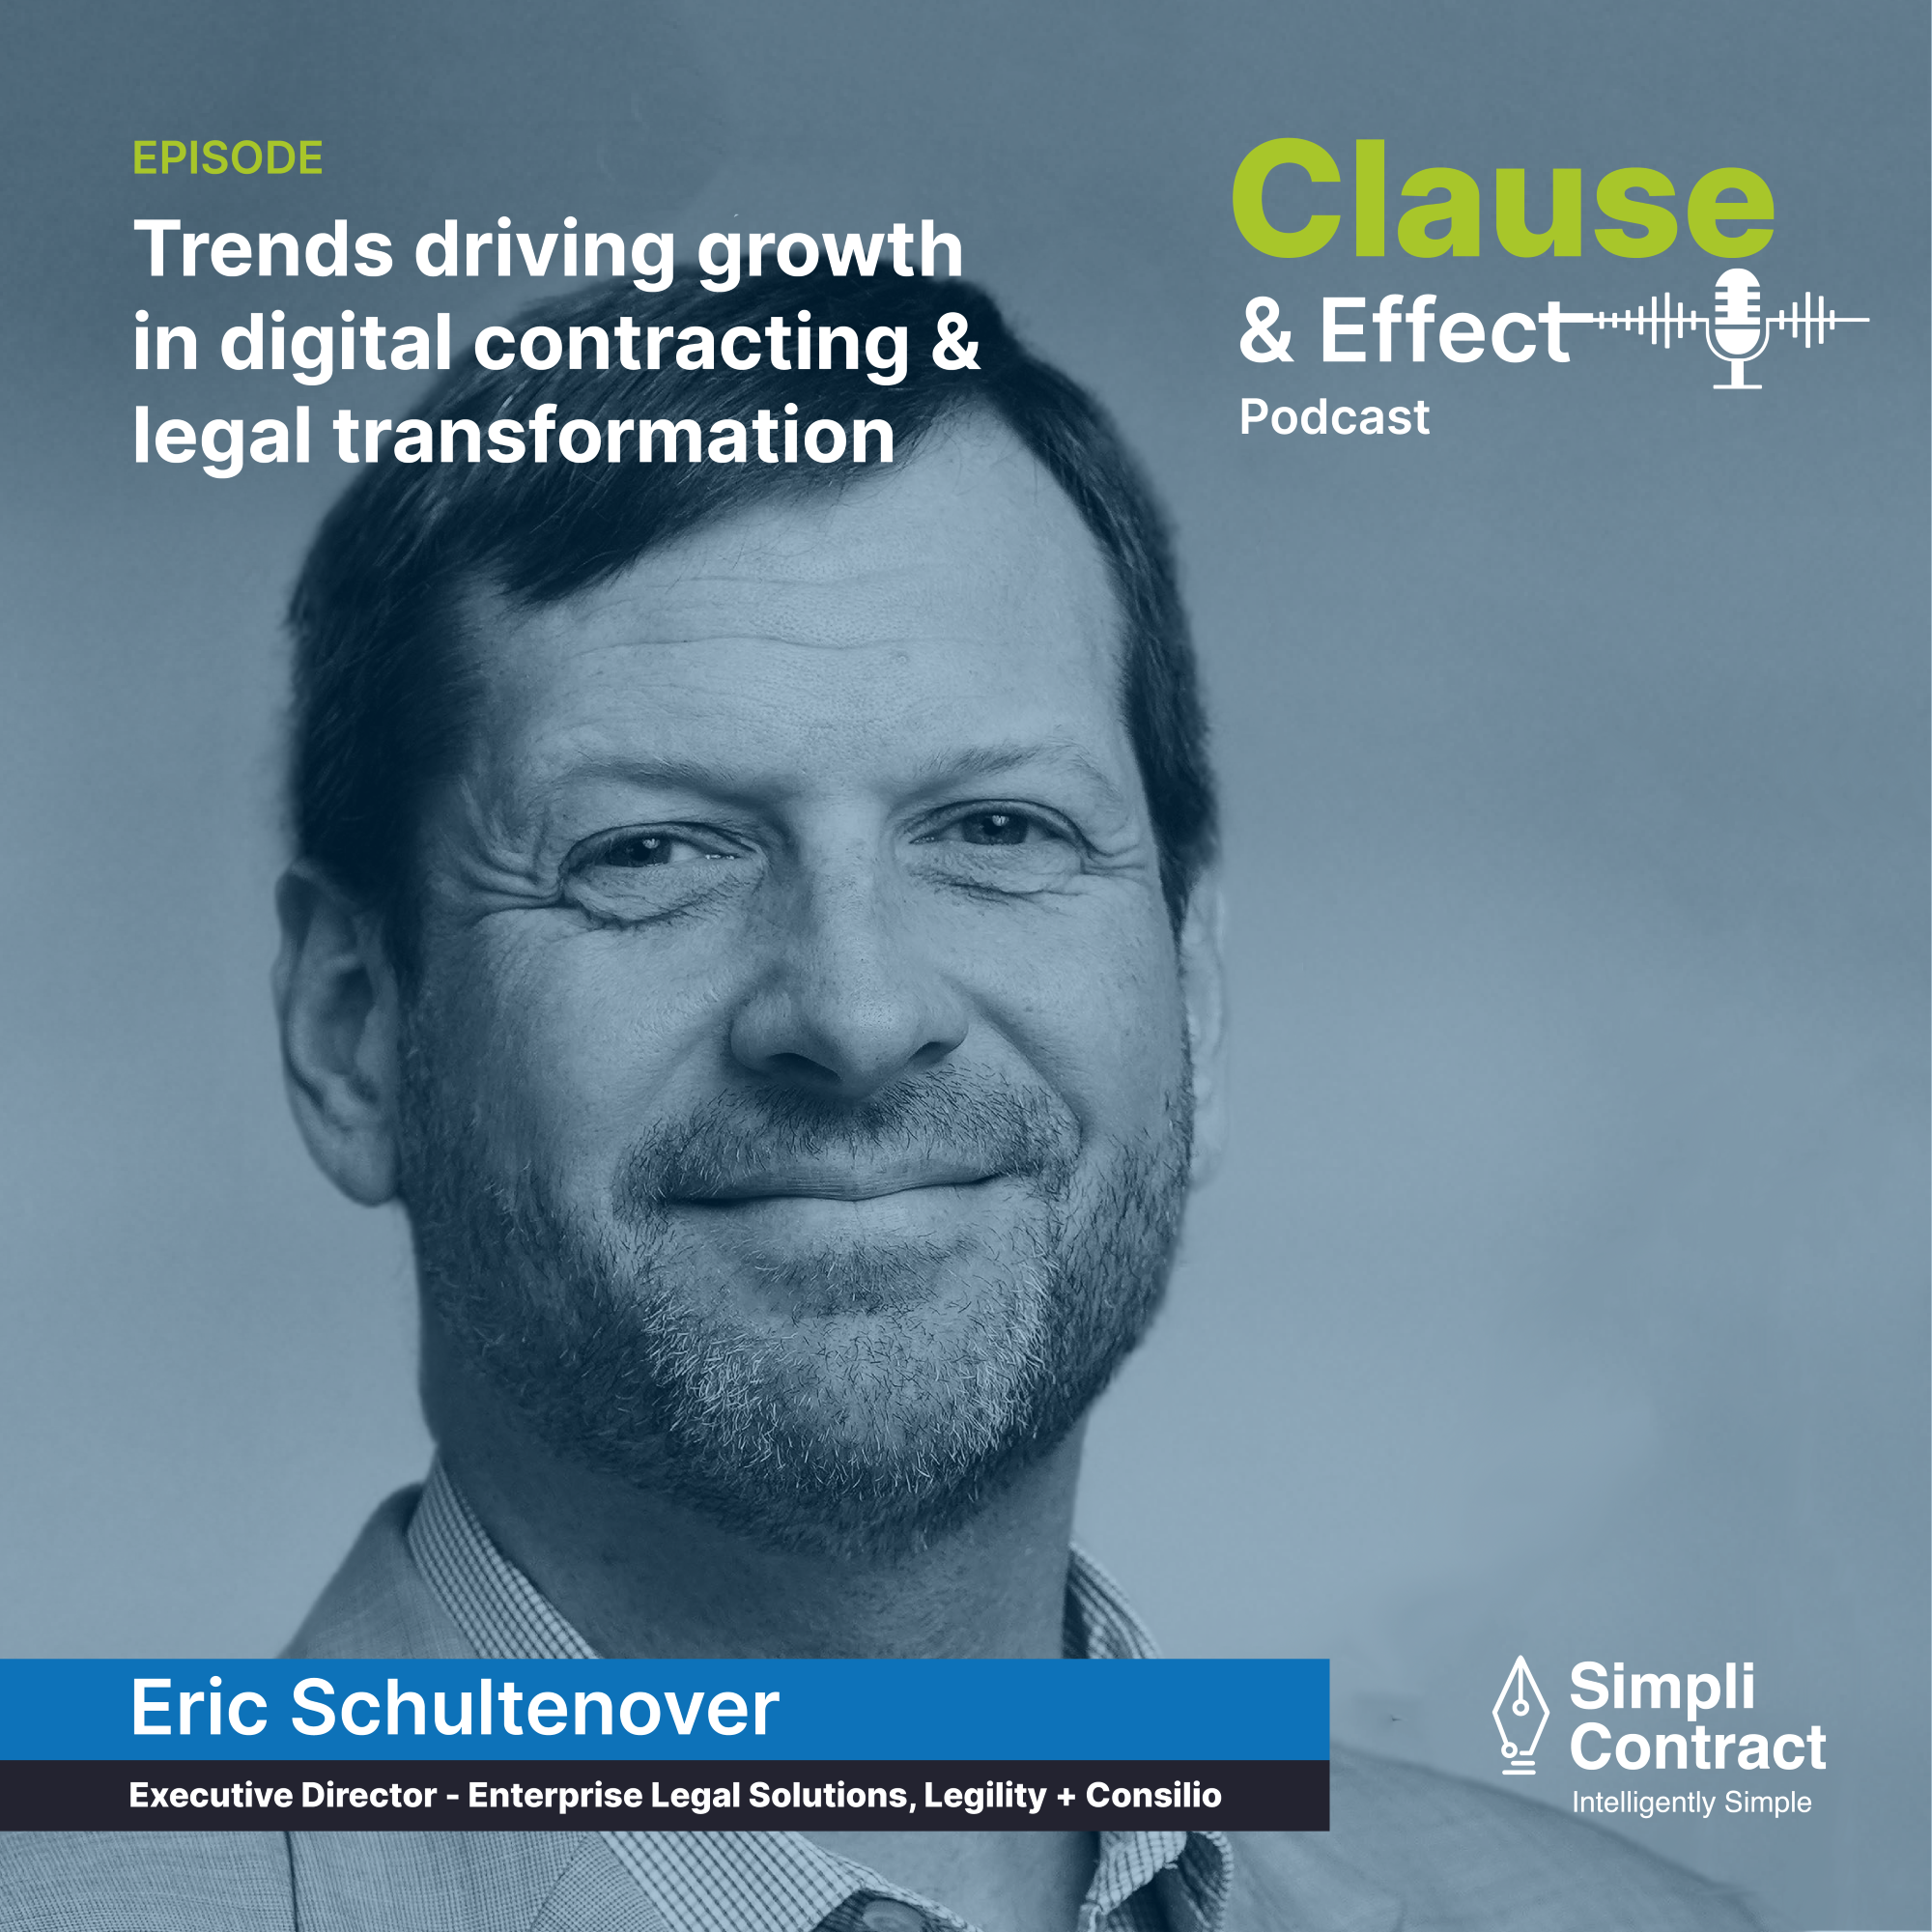 Trends Driving Growth in Digital Contracting & Legal Transformation